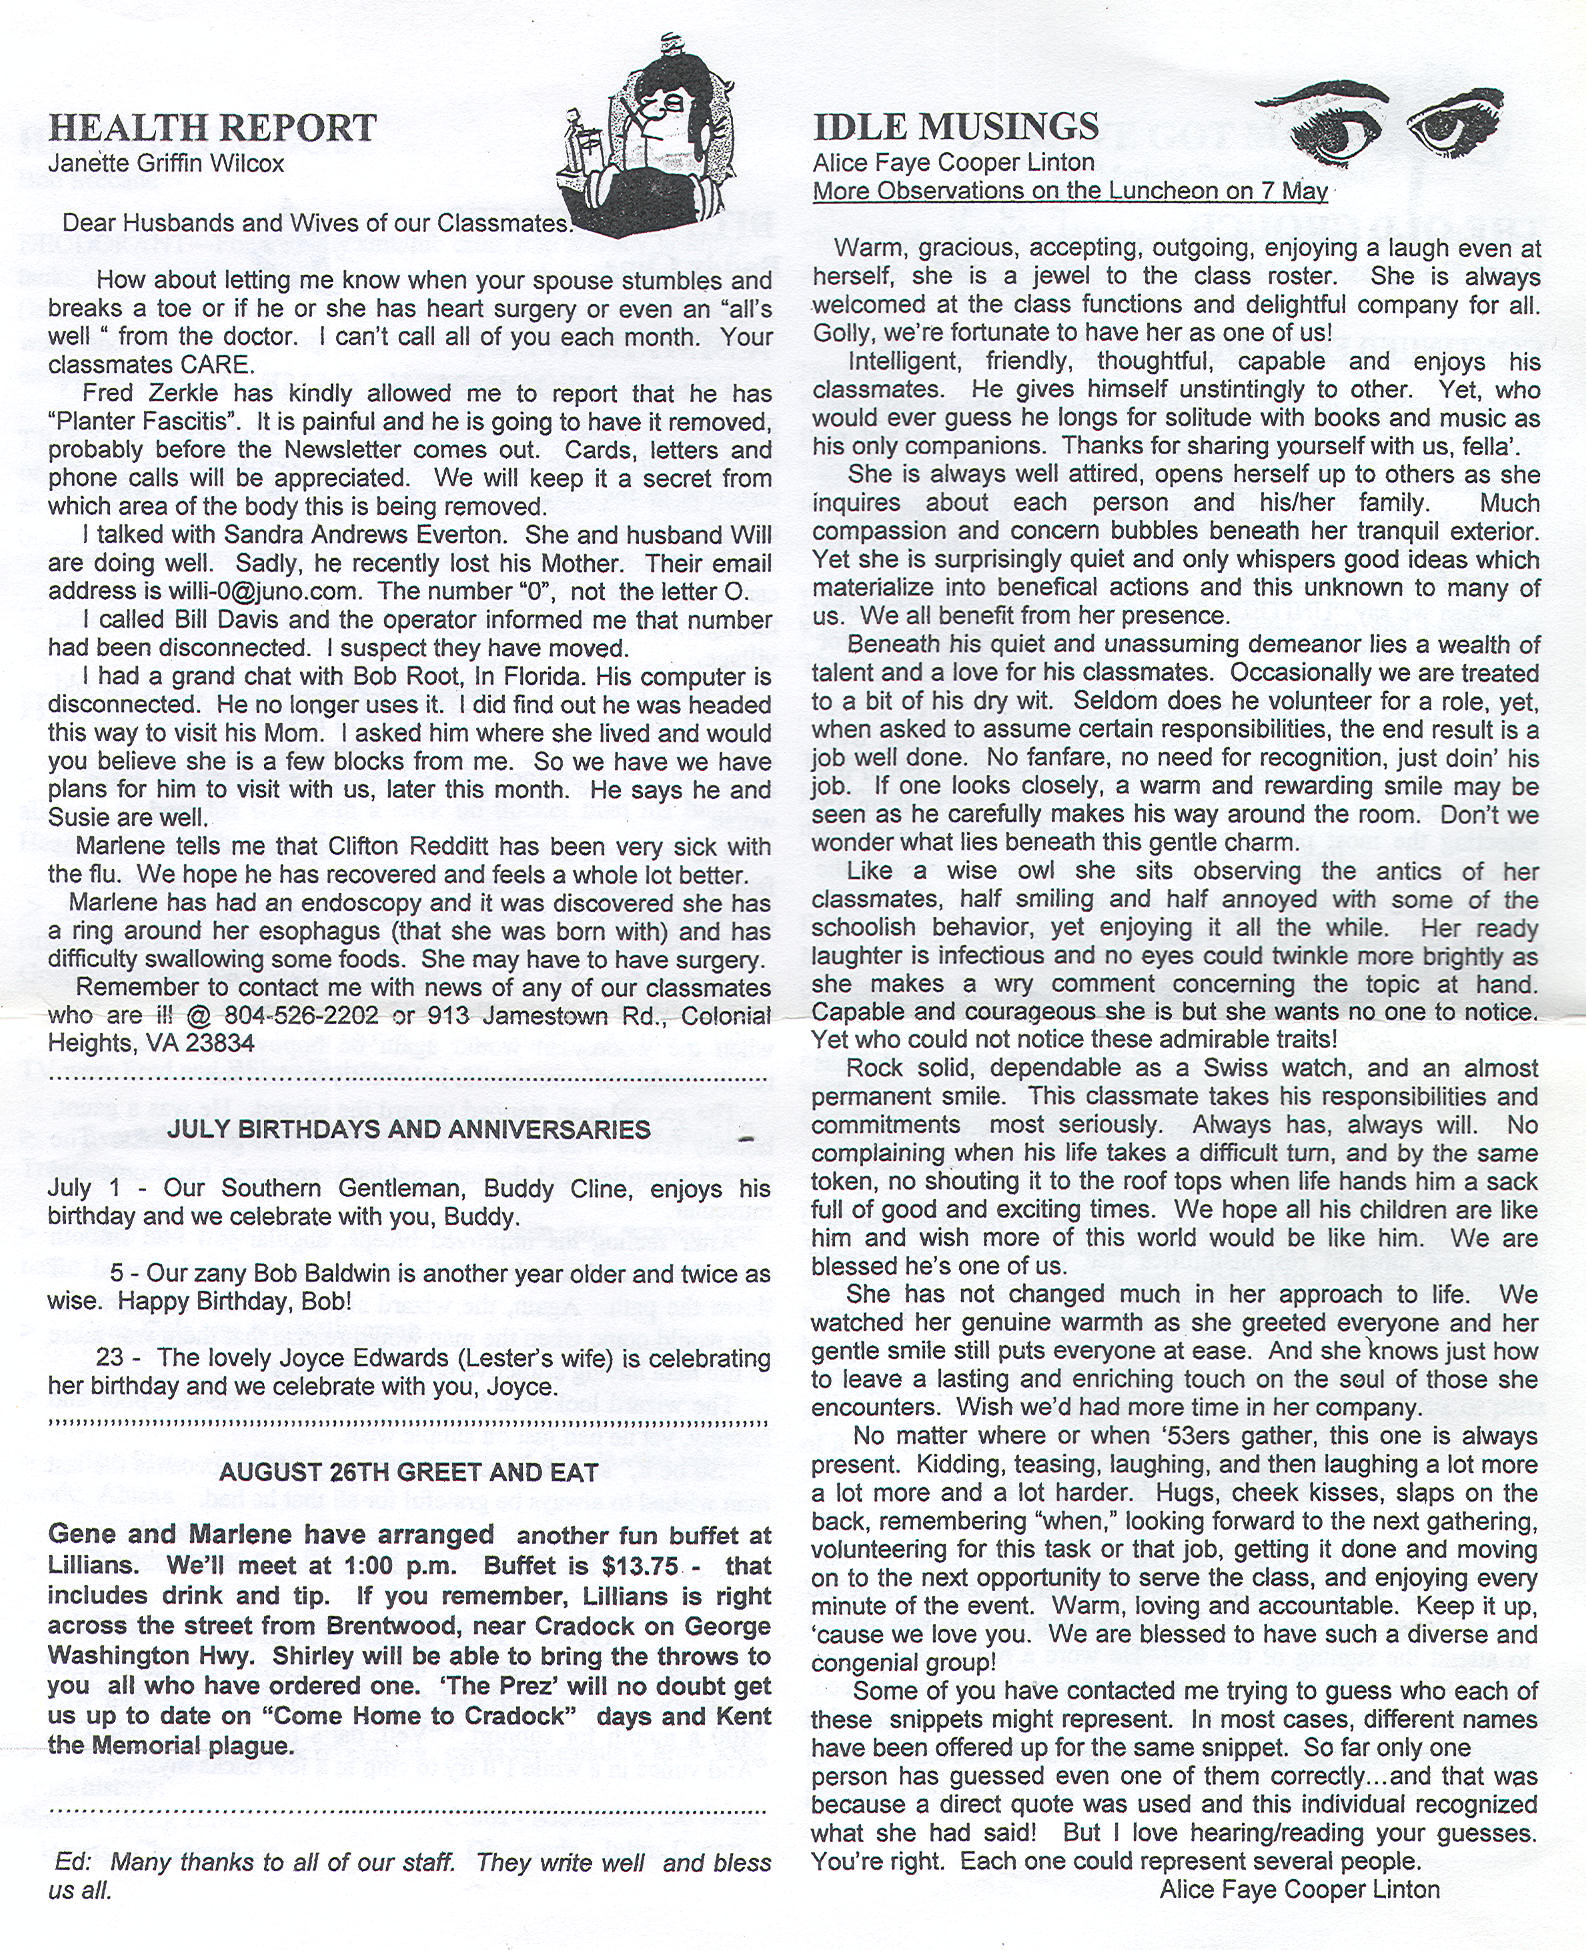 The Admiral - July 2006 - pg. 6